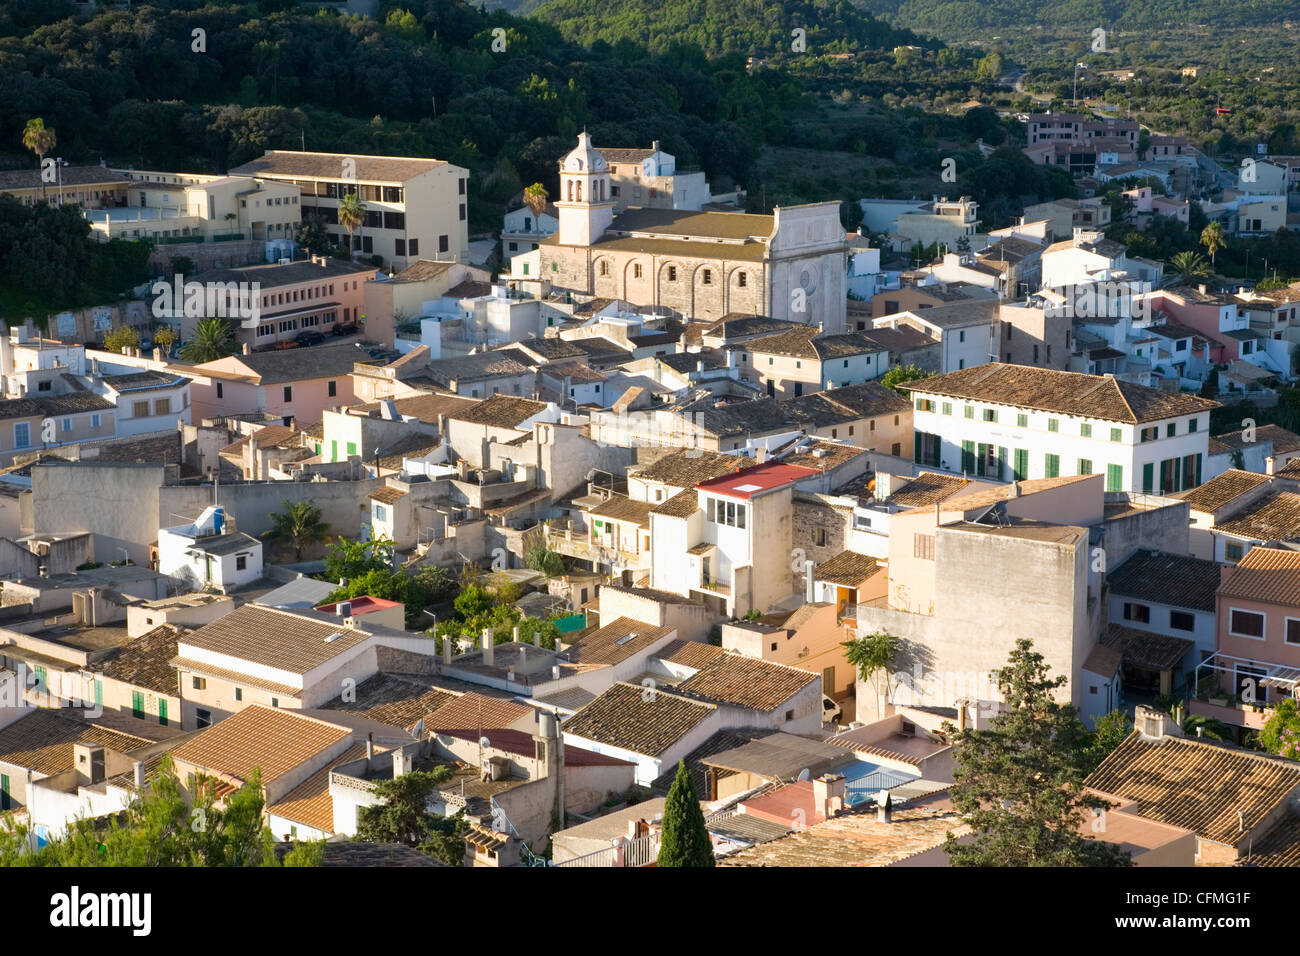 View over rooftops from the castle battlements, Capdepera, Mallorca, Balearic Islands, Spain, Europe Stock Photo